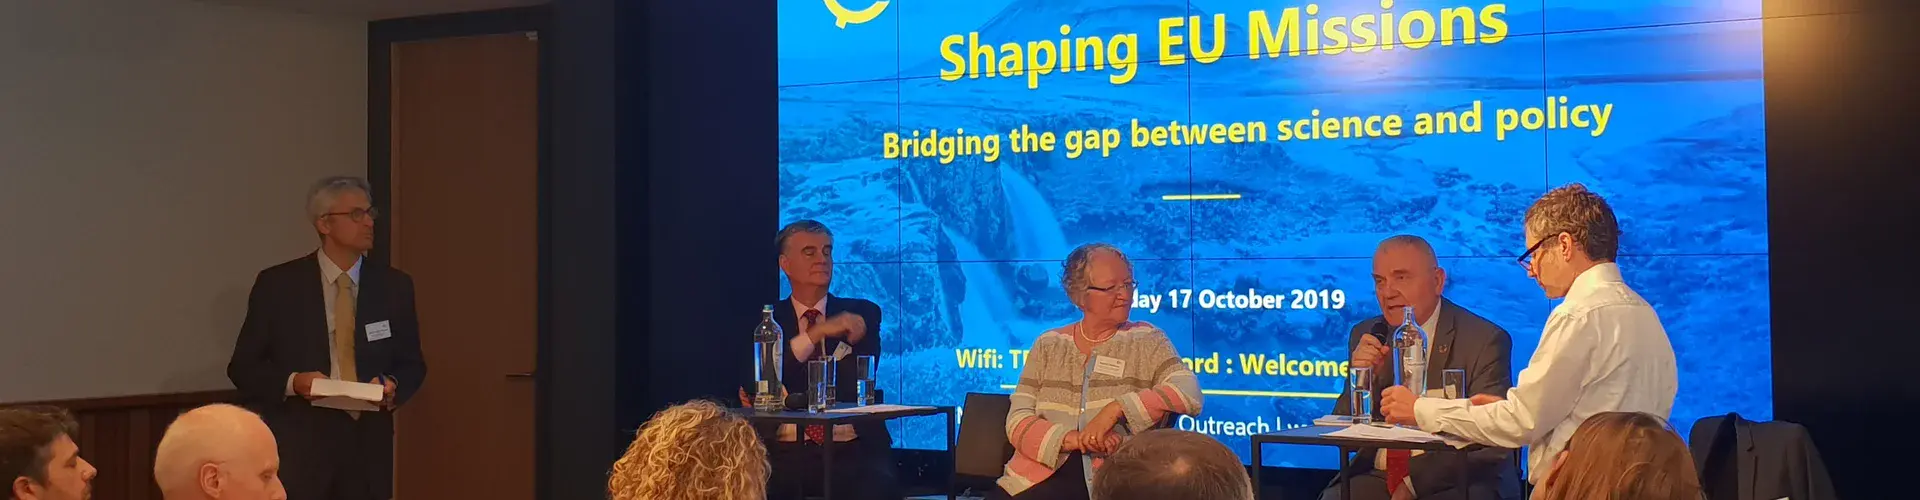 Panelists speaking at the EGU's shaping EU Missions event in Brussels, Belgium. (Credit: European Geosciences Union)